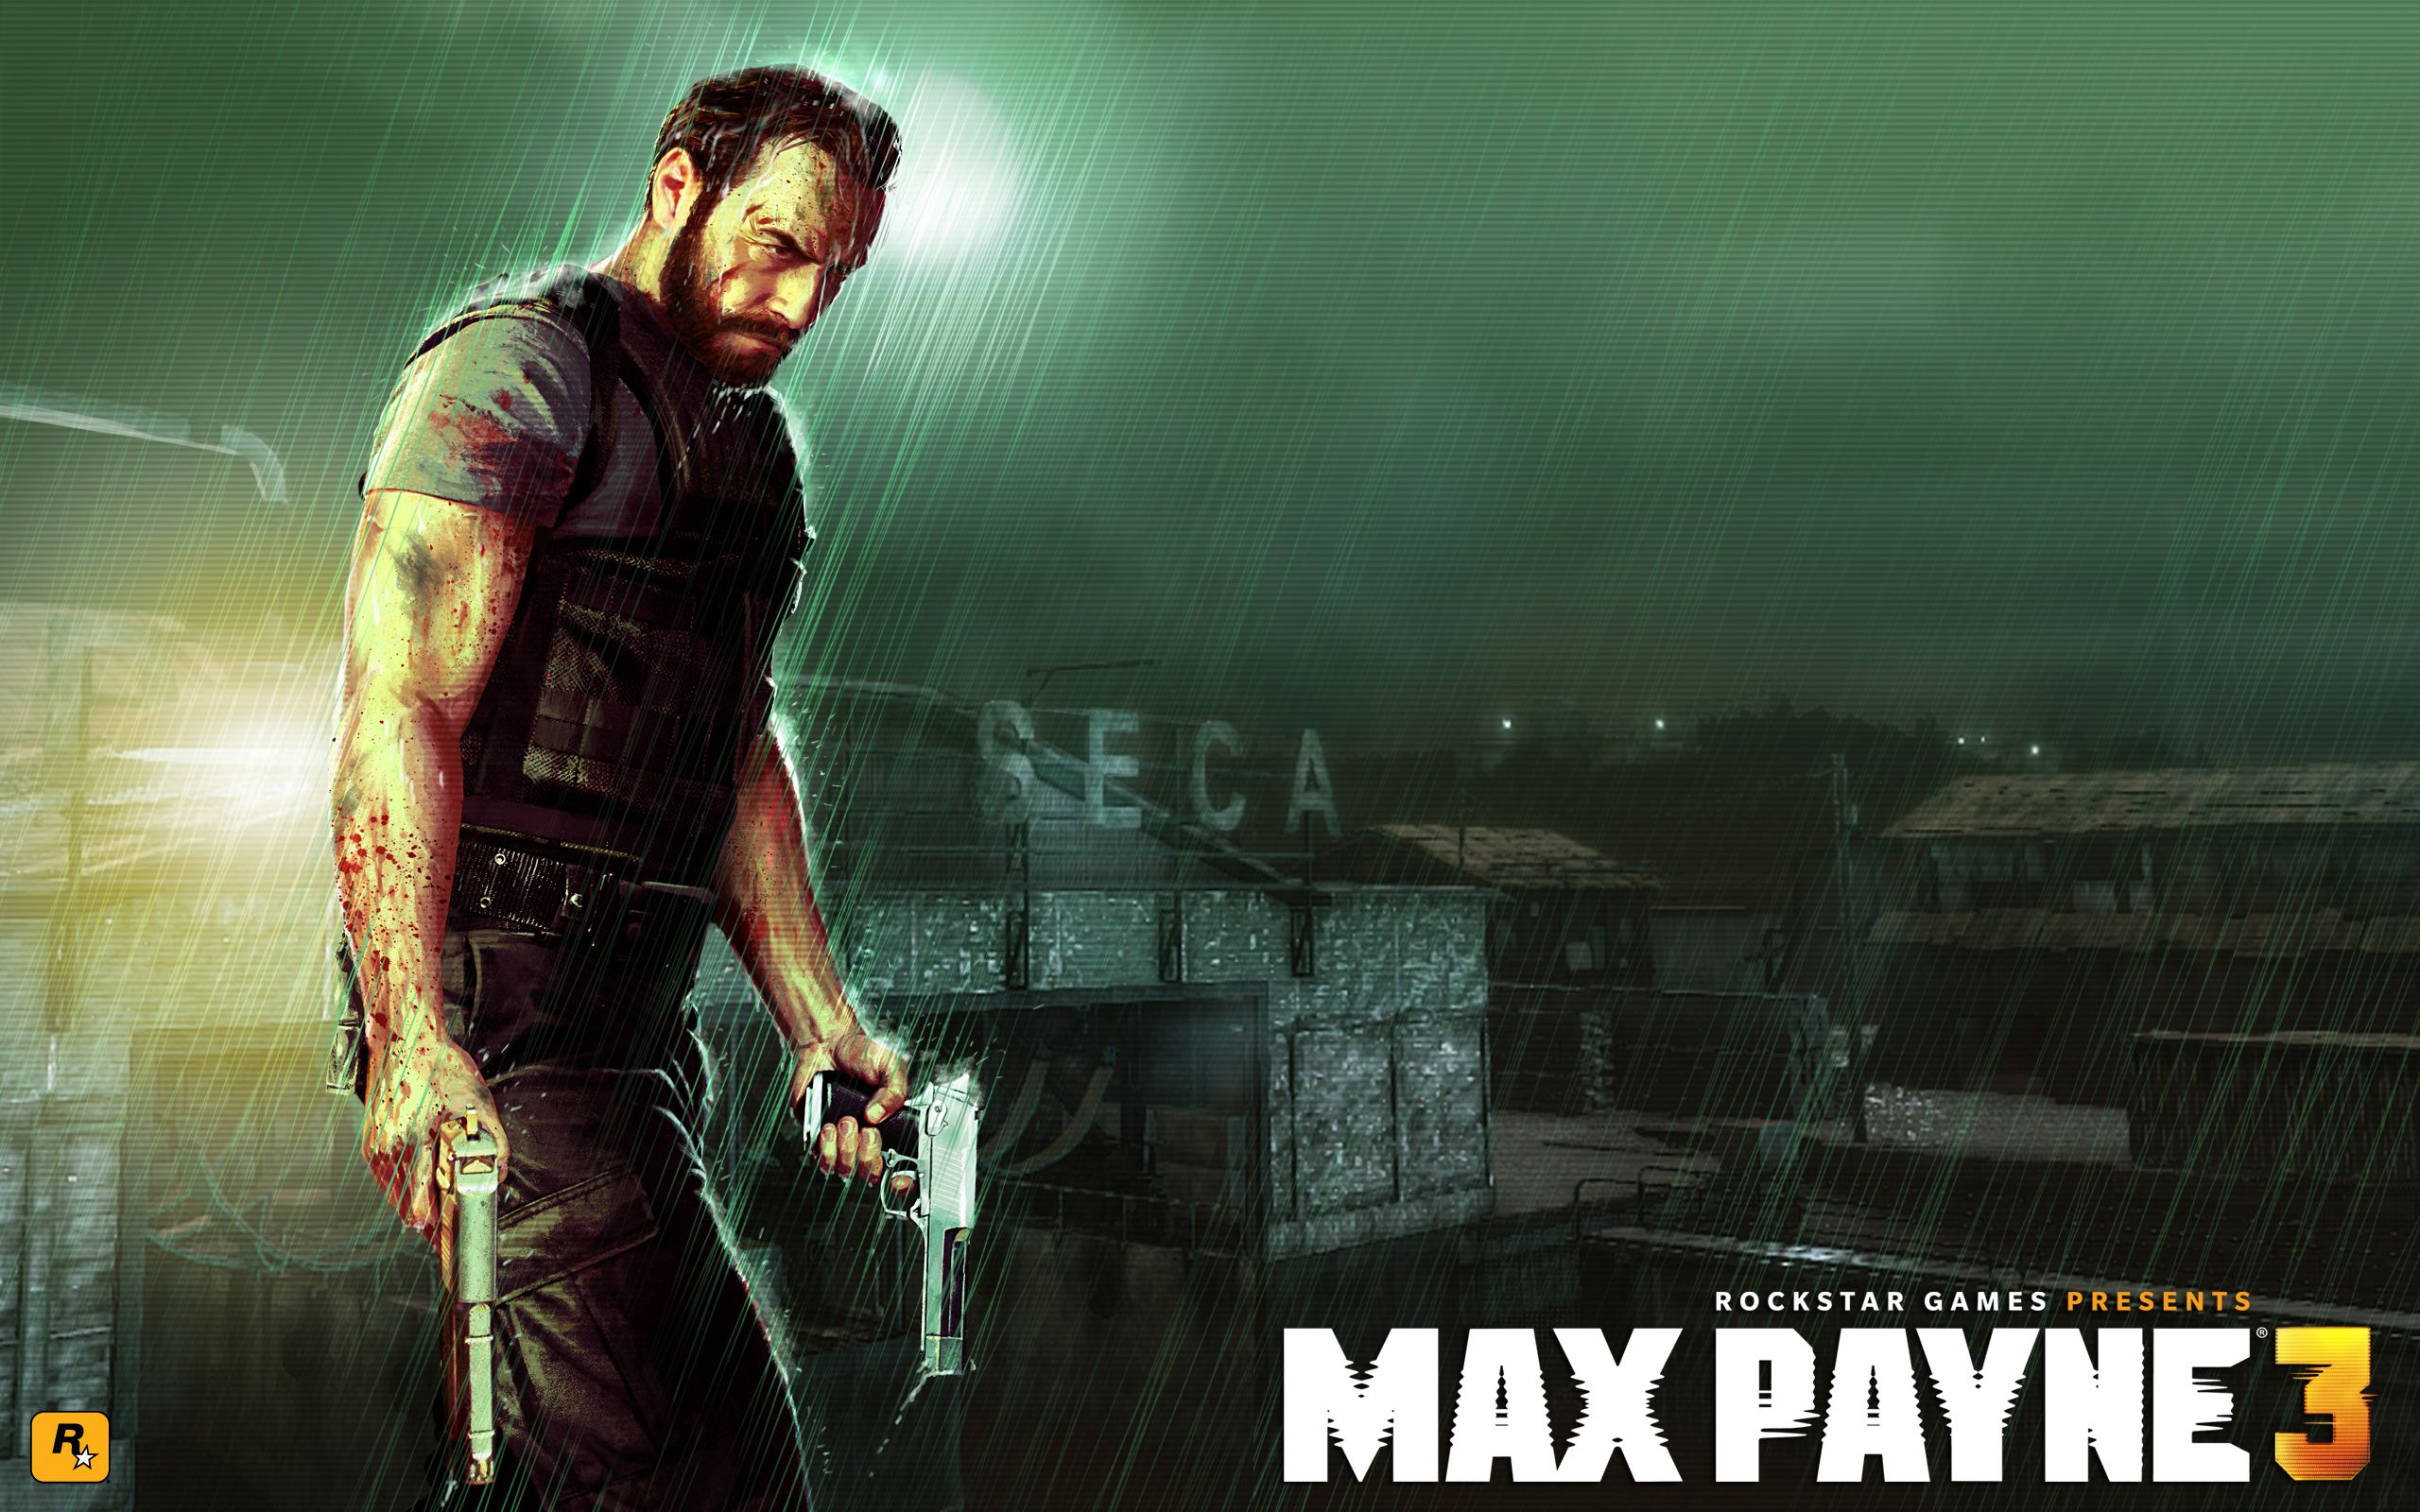 Free download Max Payne 3 Game Wallpaper HD Wallpaper [2560x1600] for your Desktop, Mobile & Tablet. Explore Max Payne 3 Wallpaper 1920x1080. Max Payne 3 Wallpaper 1920x Max Payne Wallpaper, Witcher 3 Wallpaper 1920X1080